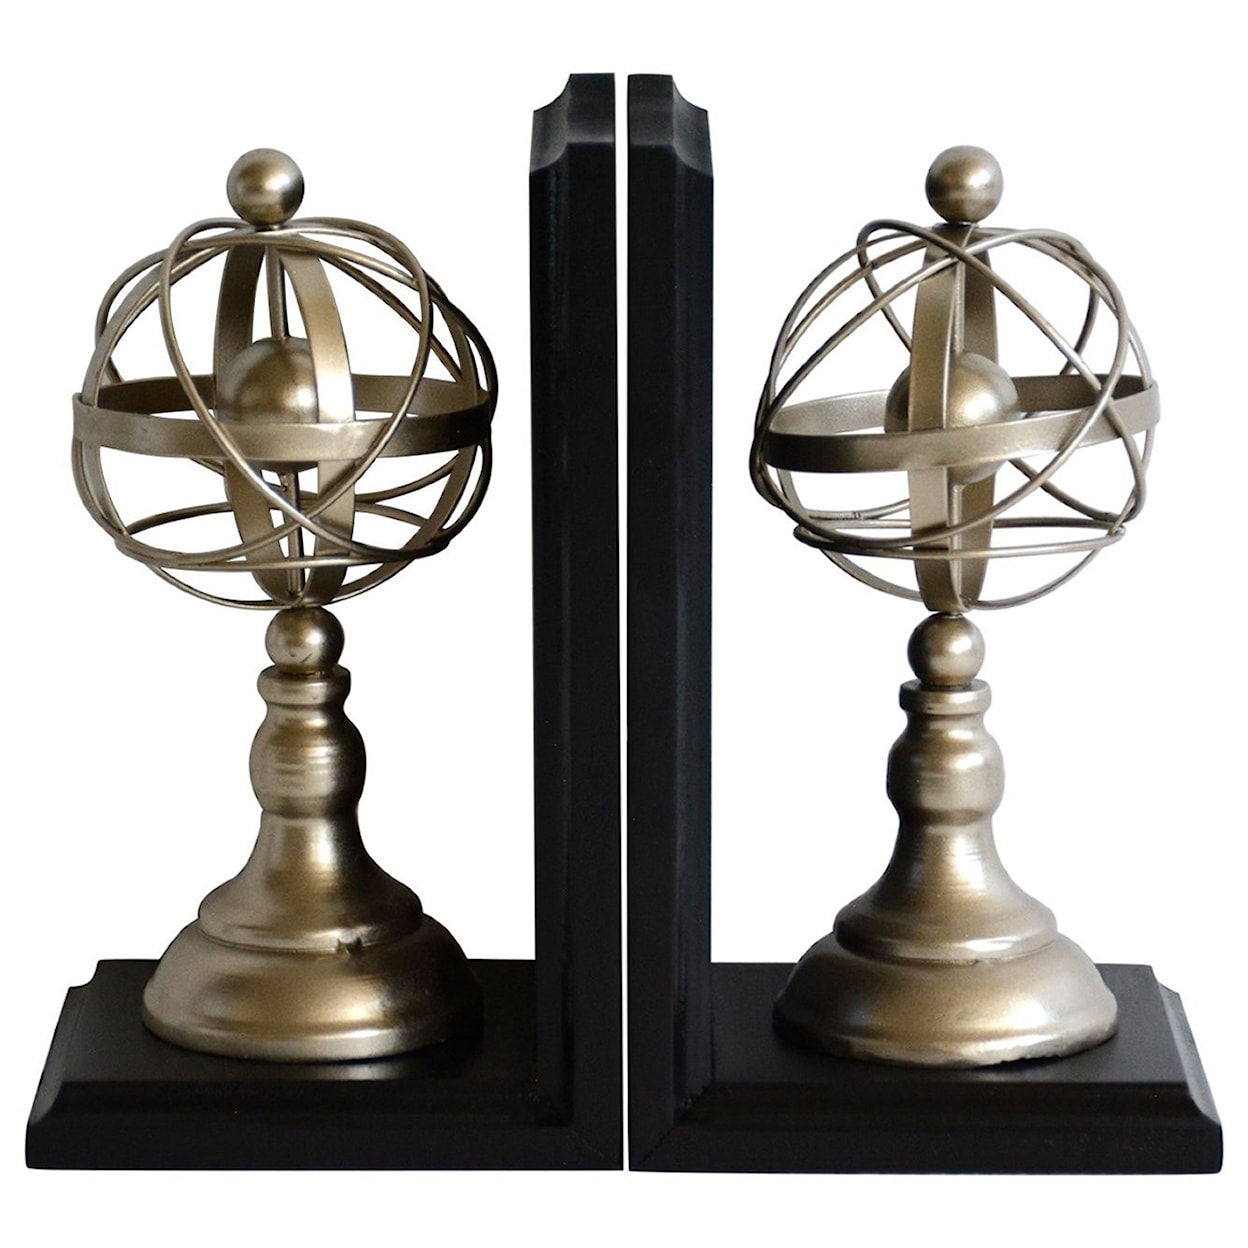 Crestview Collection Decorative Accessories Book Ends